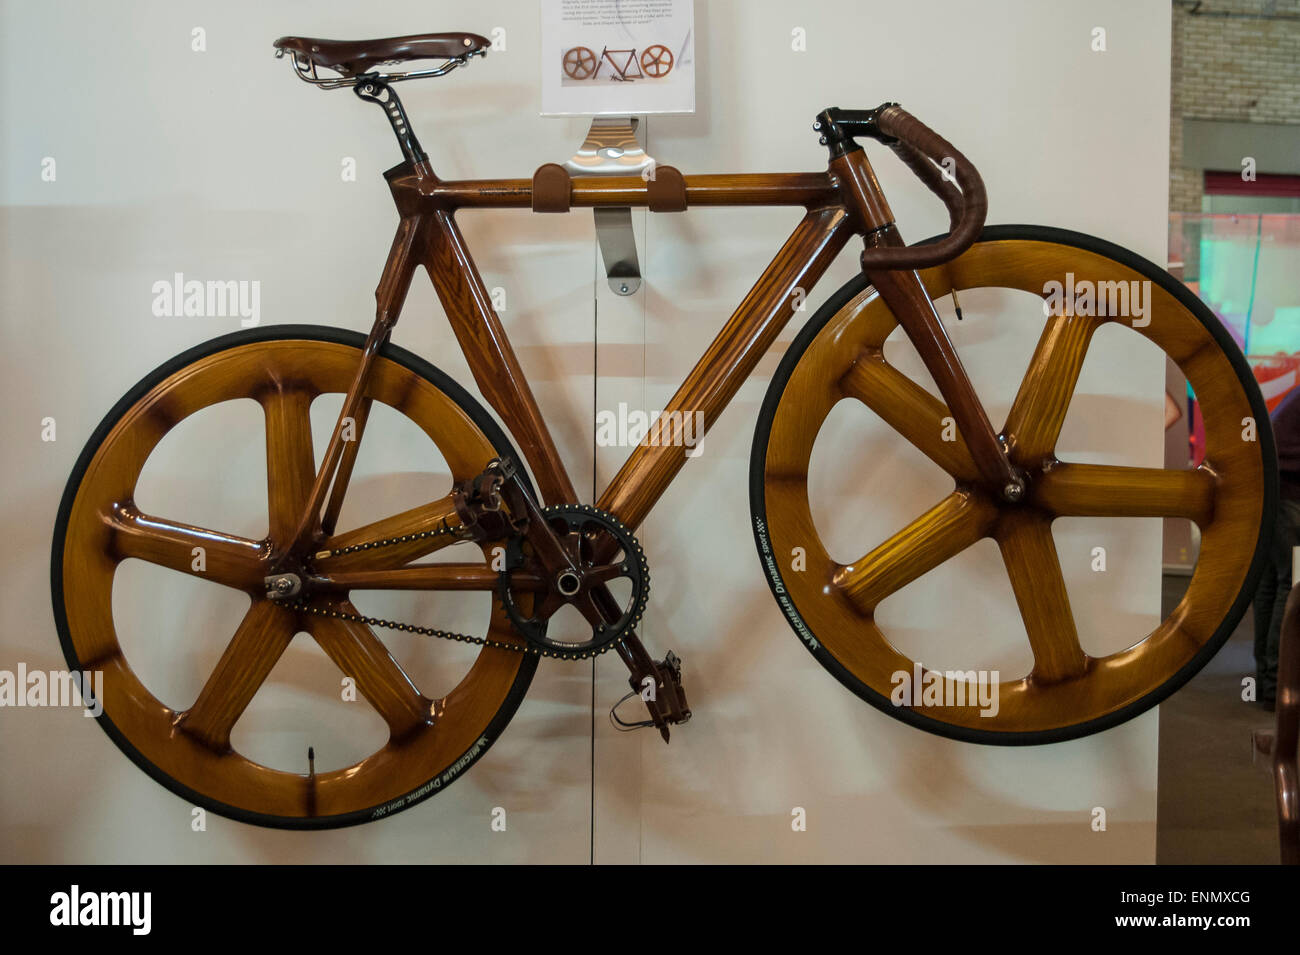 London, UK. 8 May 2015. A custom bicycle, made to look like it is made out of wood, is one of the items to see for cycling fans who visit Spin London, Europe's biggest urban cycling show, which opened today in Holborn. Credit:  Stephen Chung / Alamy Live News Stock Photo